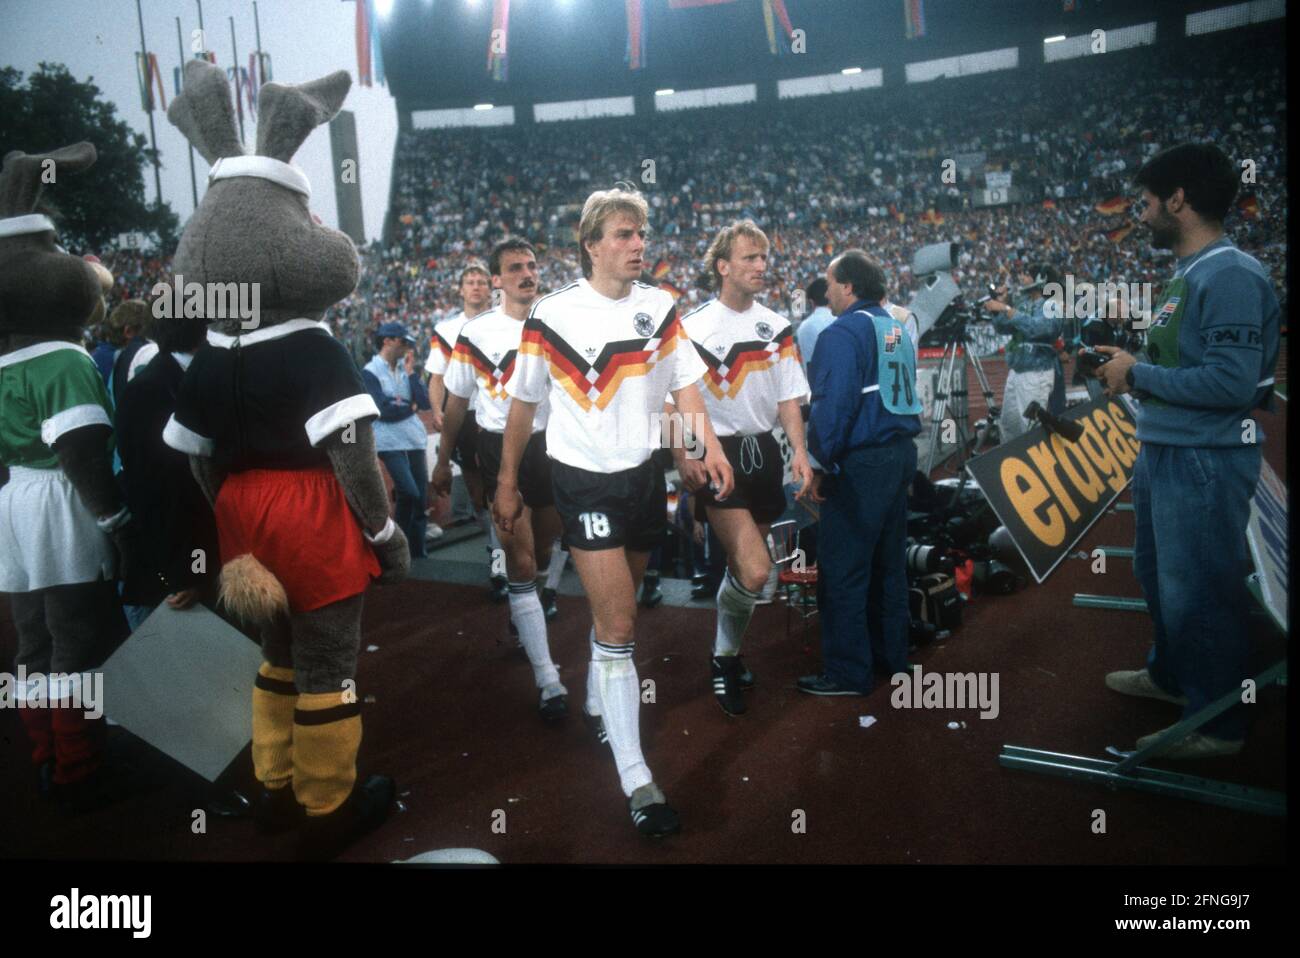 European Football Championship 1988 in Germany: Opening match Germany - Italy 1:1/11.06.1988 in Düsseldorf. The German team on the way to the pitch at the Rheinstadion in Düsseldorf. In front: Jürgen Klinsmann. Behind: Andy Brehme (right) and Jürgen Kohler. [automated translation] Stock Photo